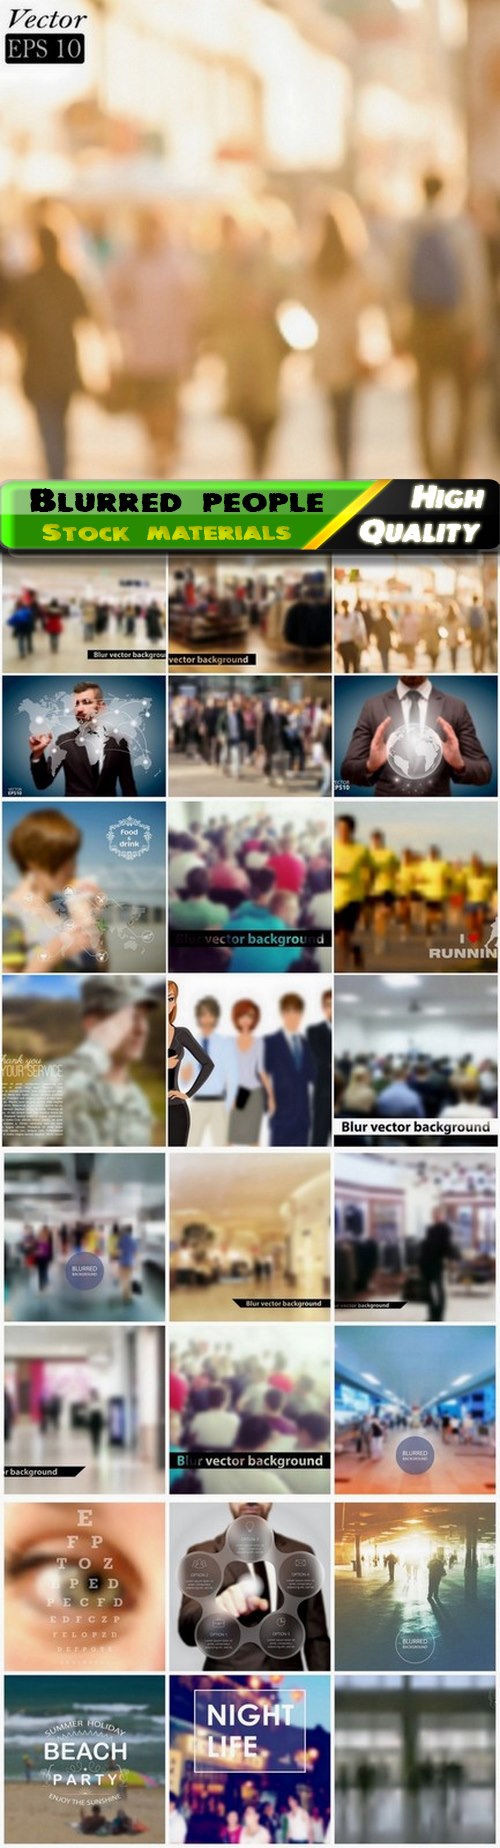 Abstract background with blurred business people - 25 Eps